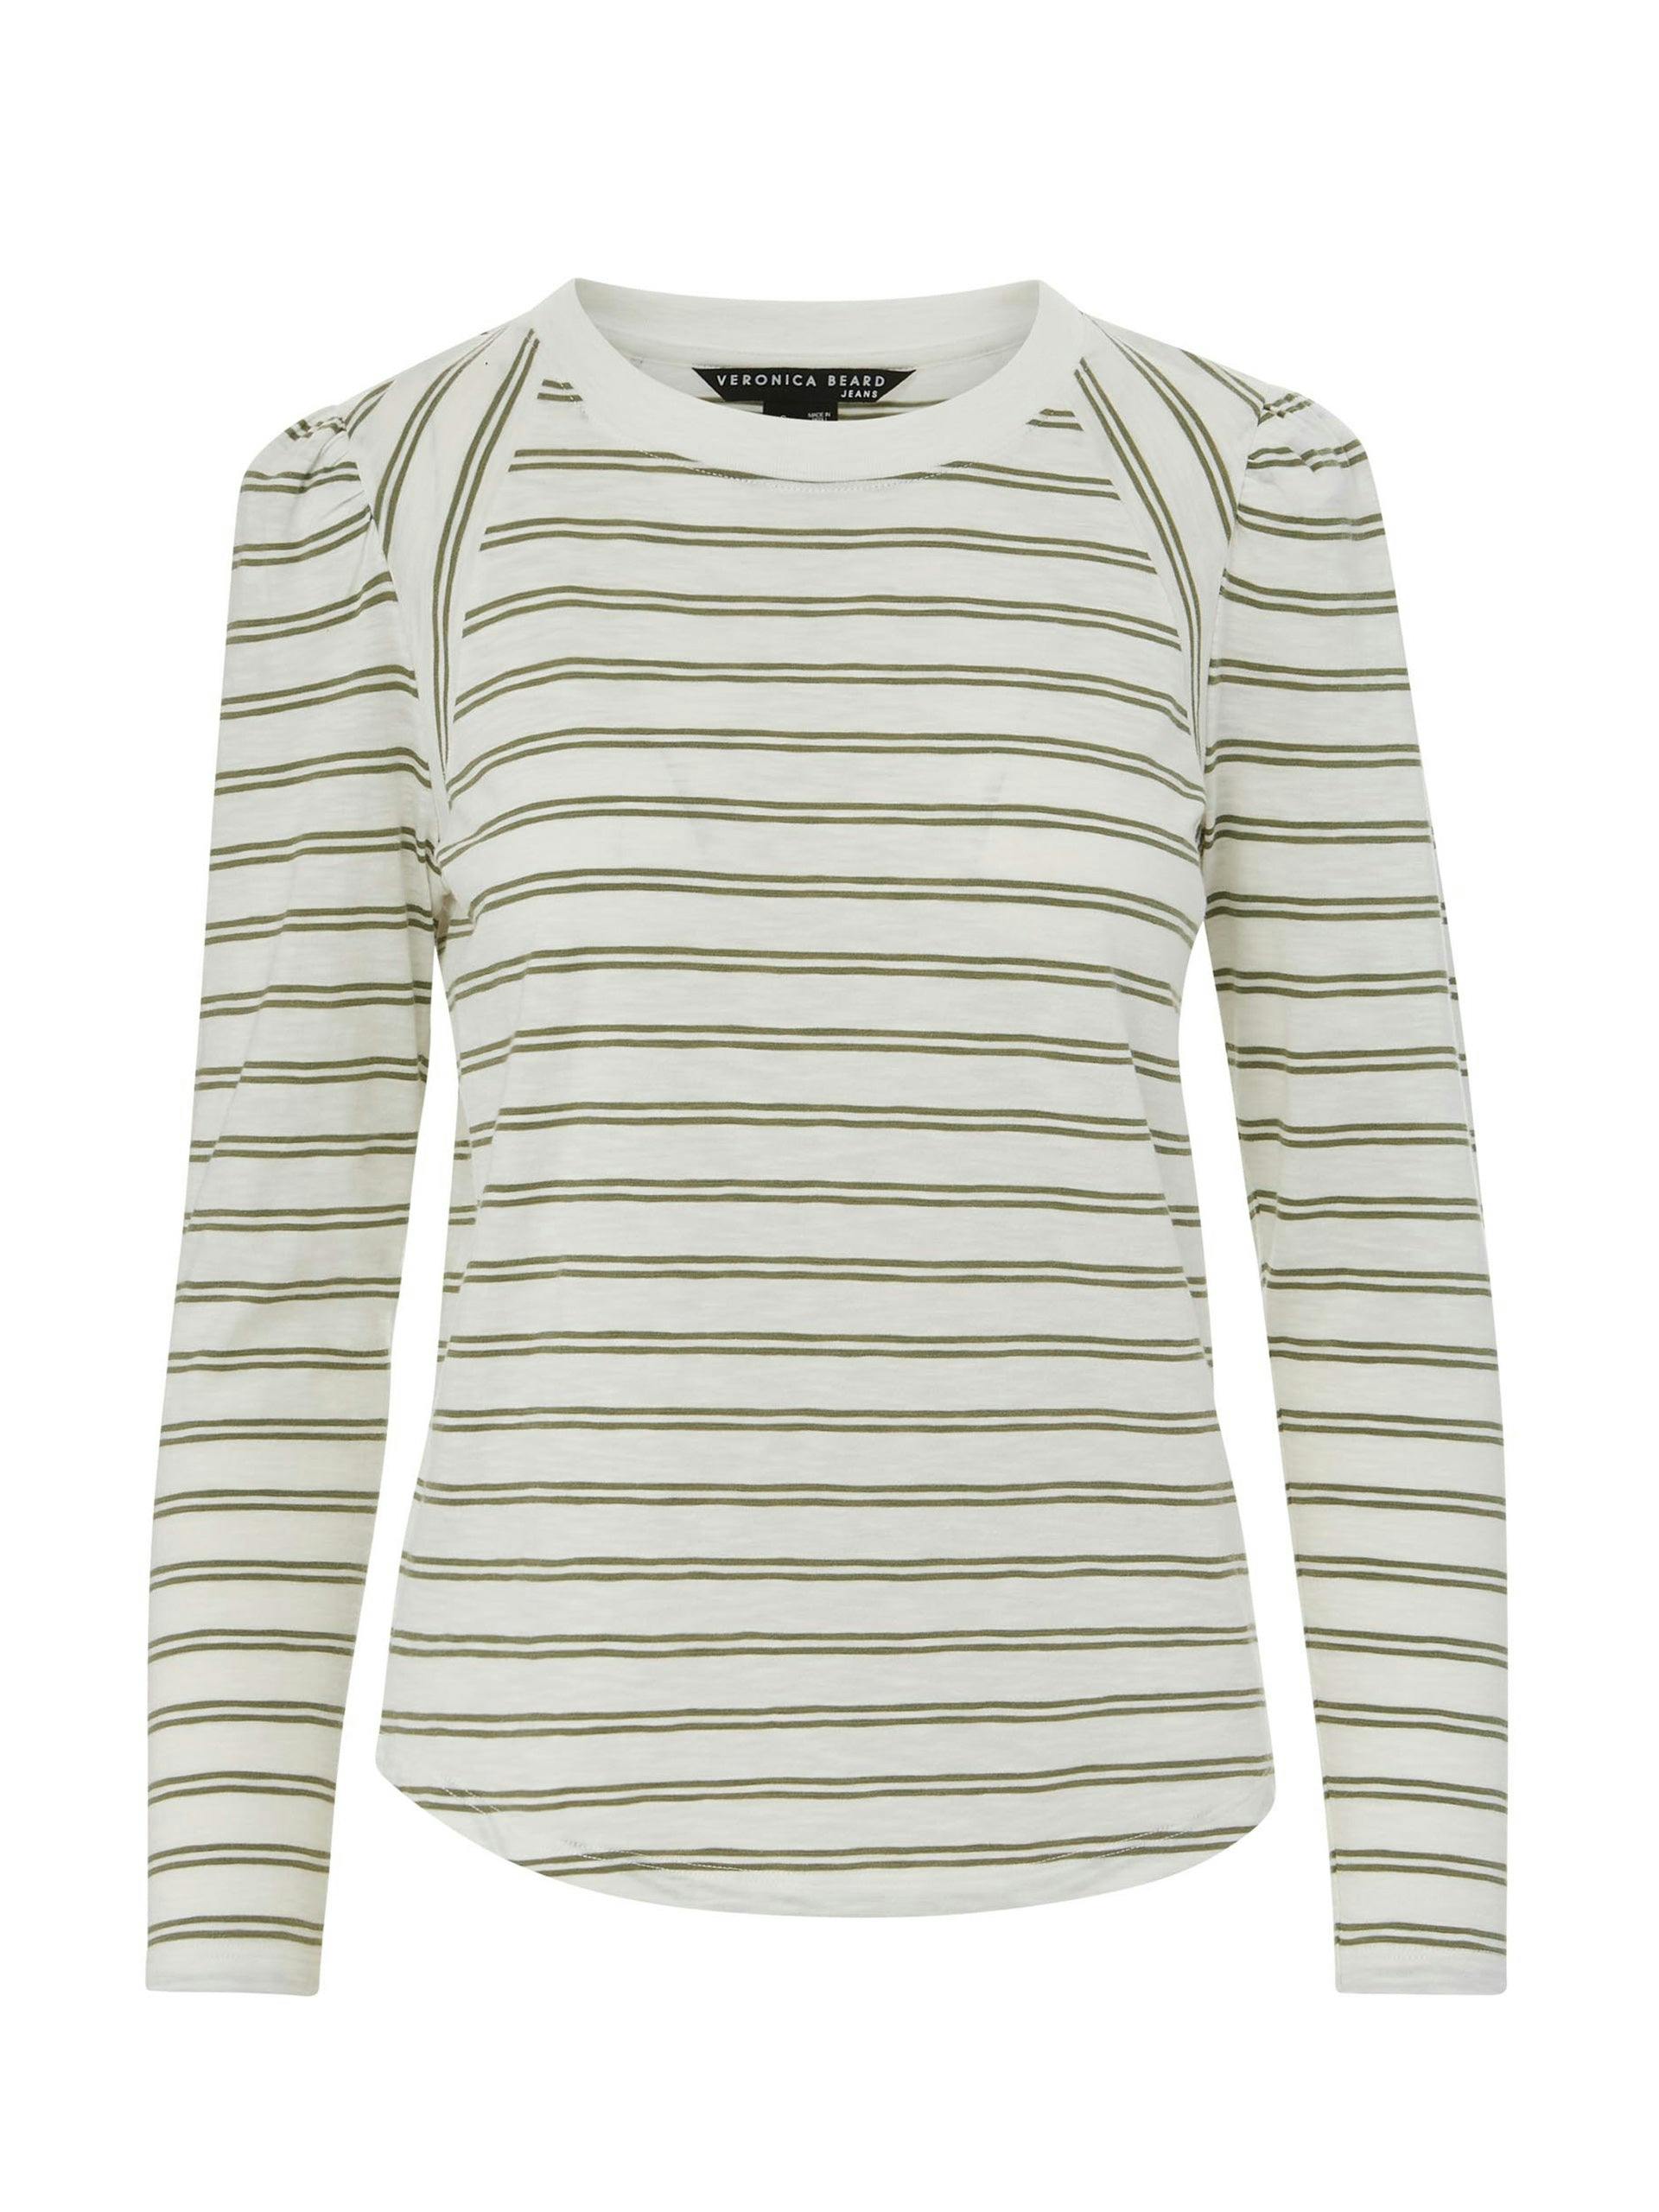 Green and white long sleeved t-shirt